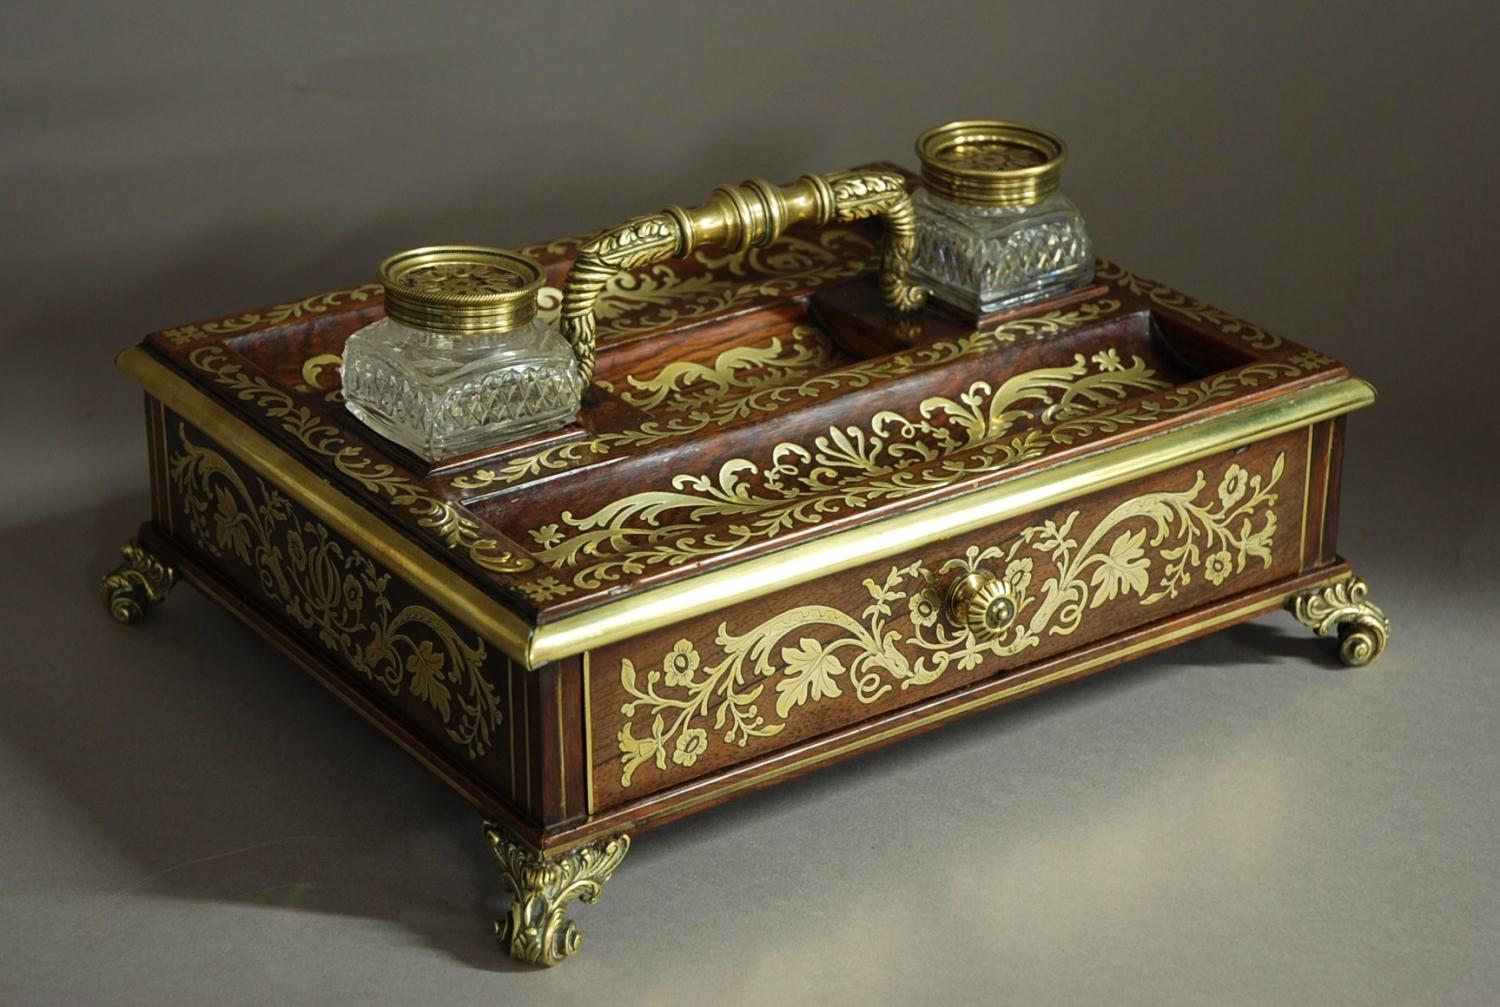 Regency rosewood and inlaid brass desk stand